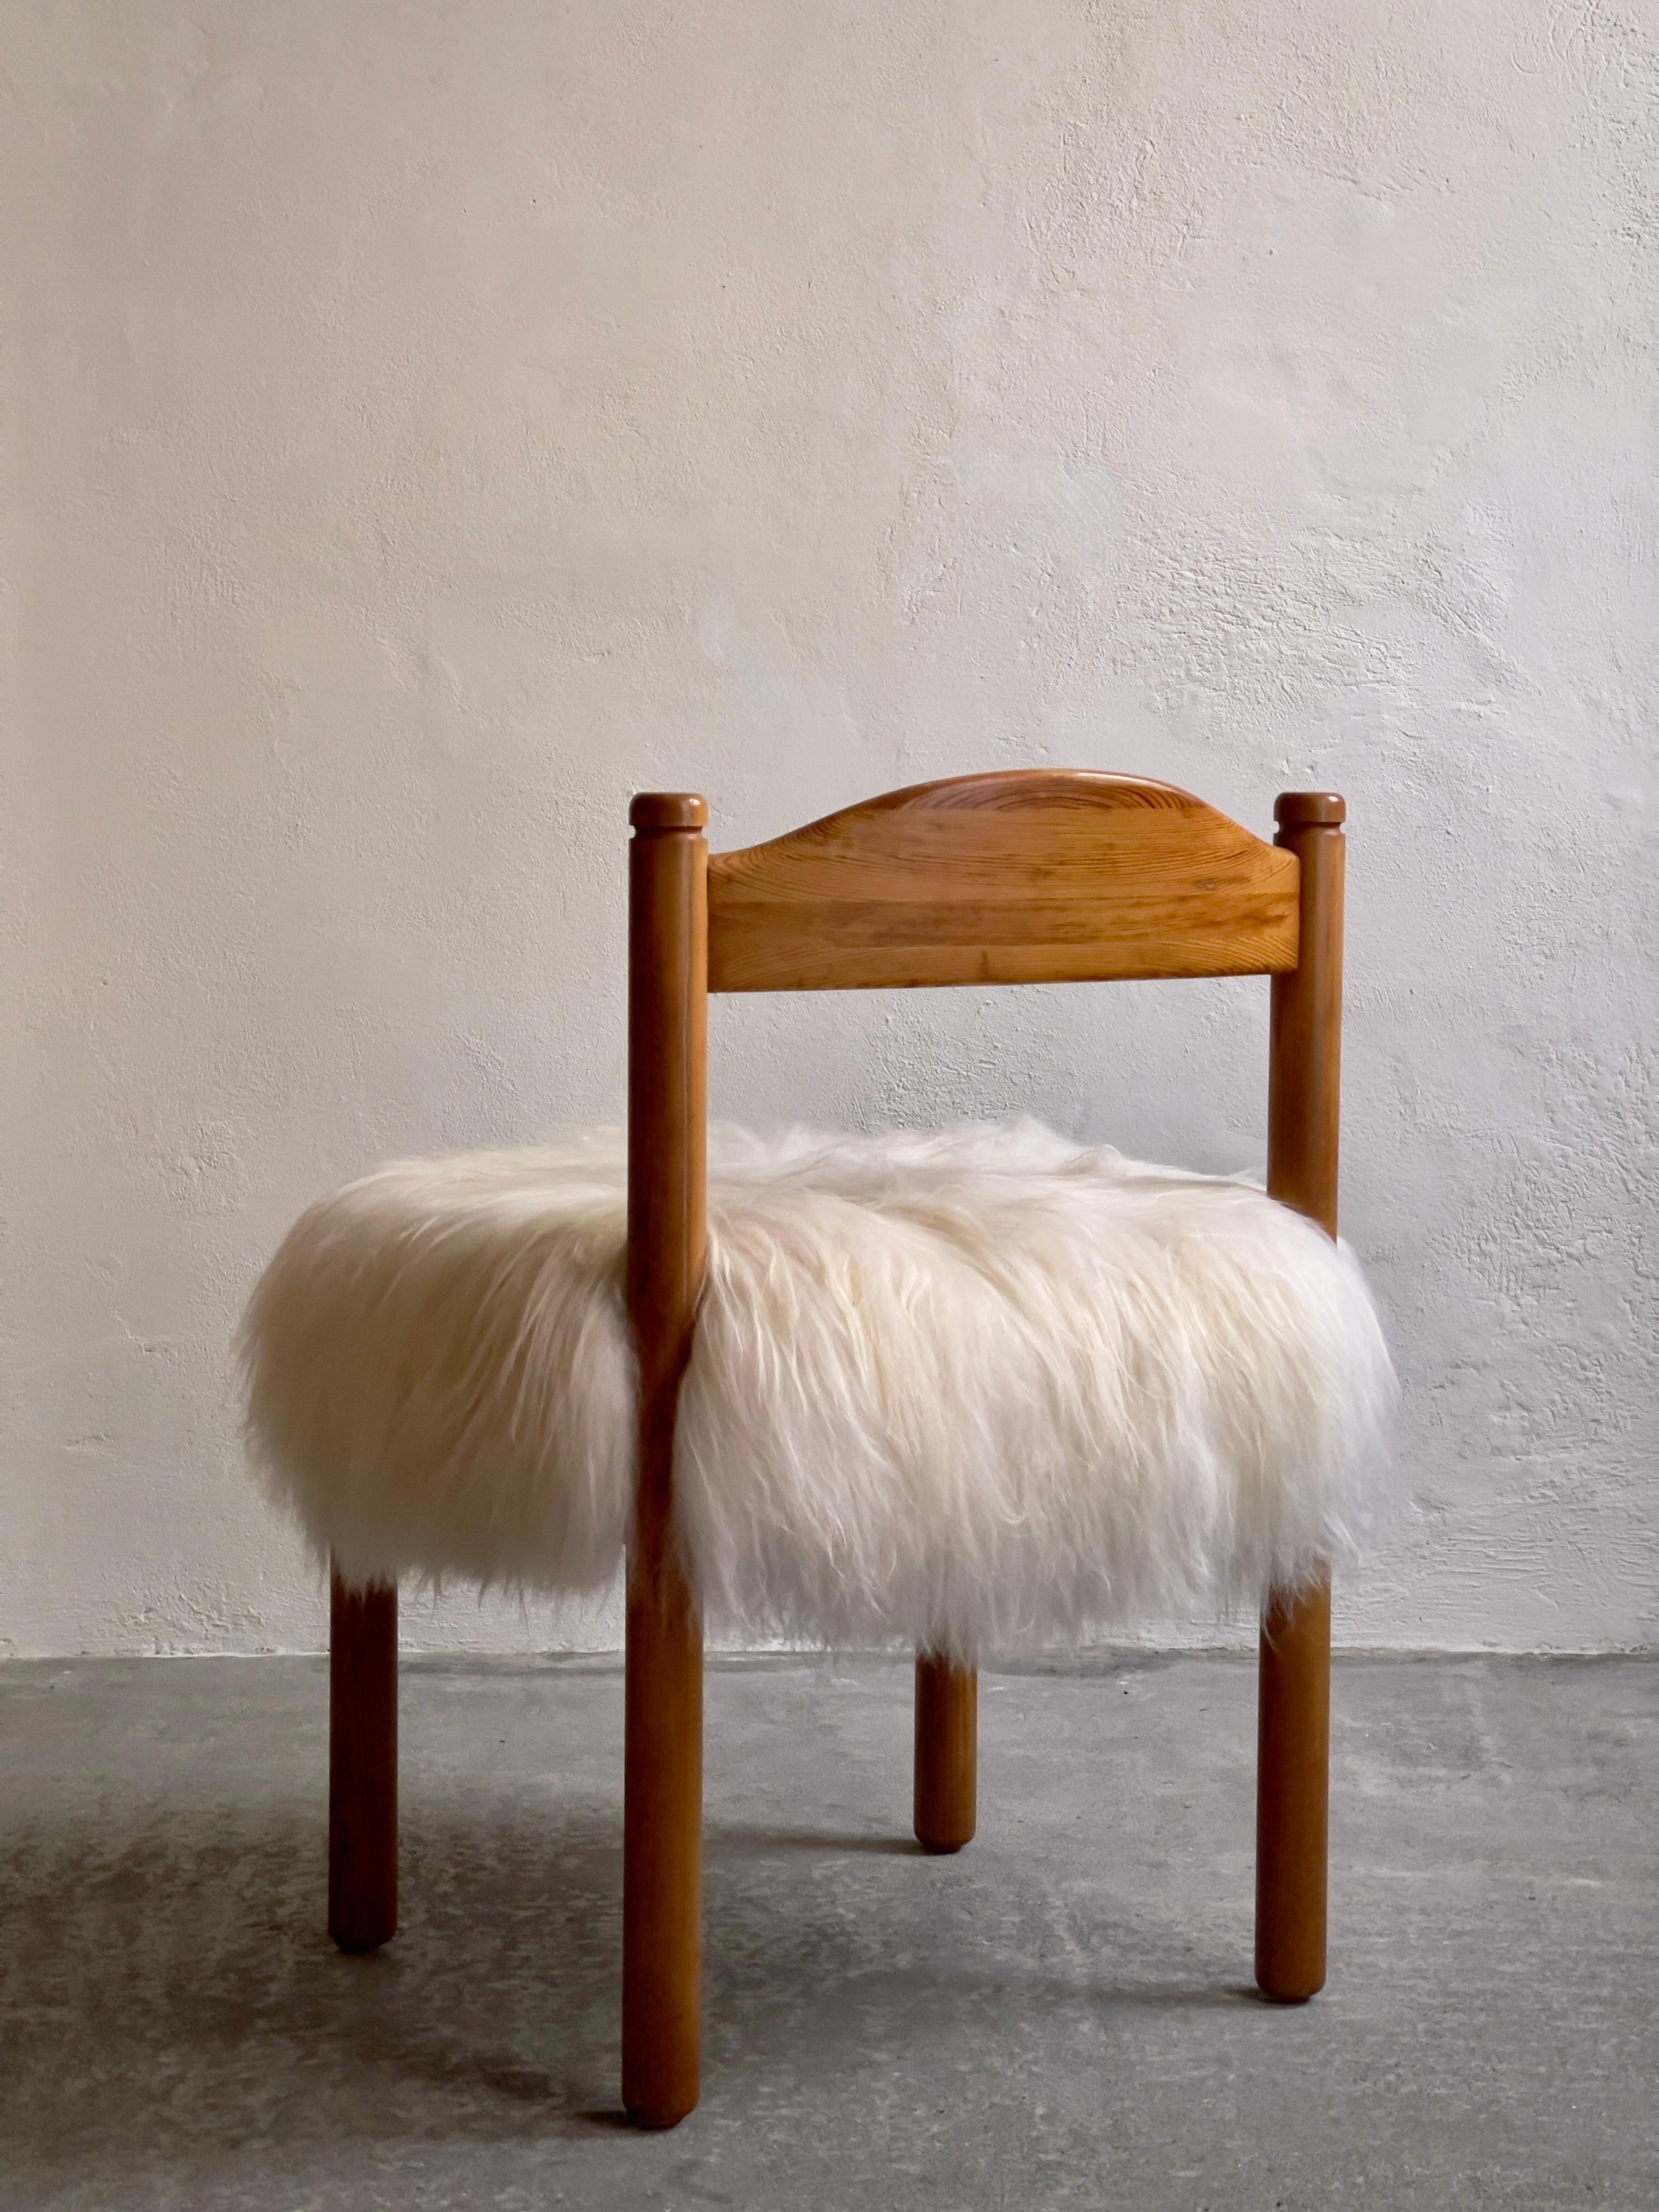 A set of 4 danish dining chairs in patinated pine and  reupholstered long haired Icelandic sheepskin. (Price is for all 4 chairs)
These 1970s chairs are expertly fashioned from patinated pine wood, which carries the allure of age. A hallmark of